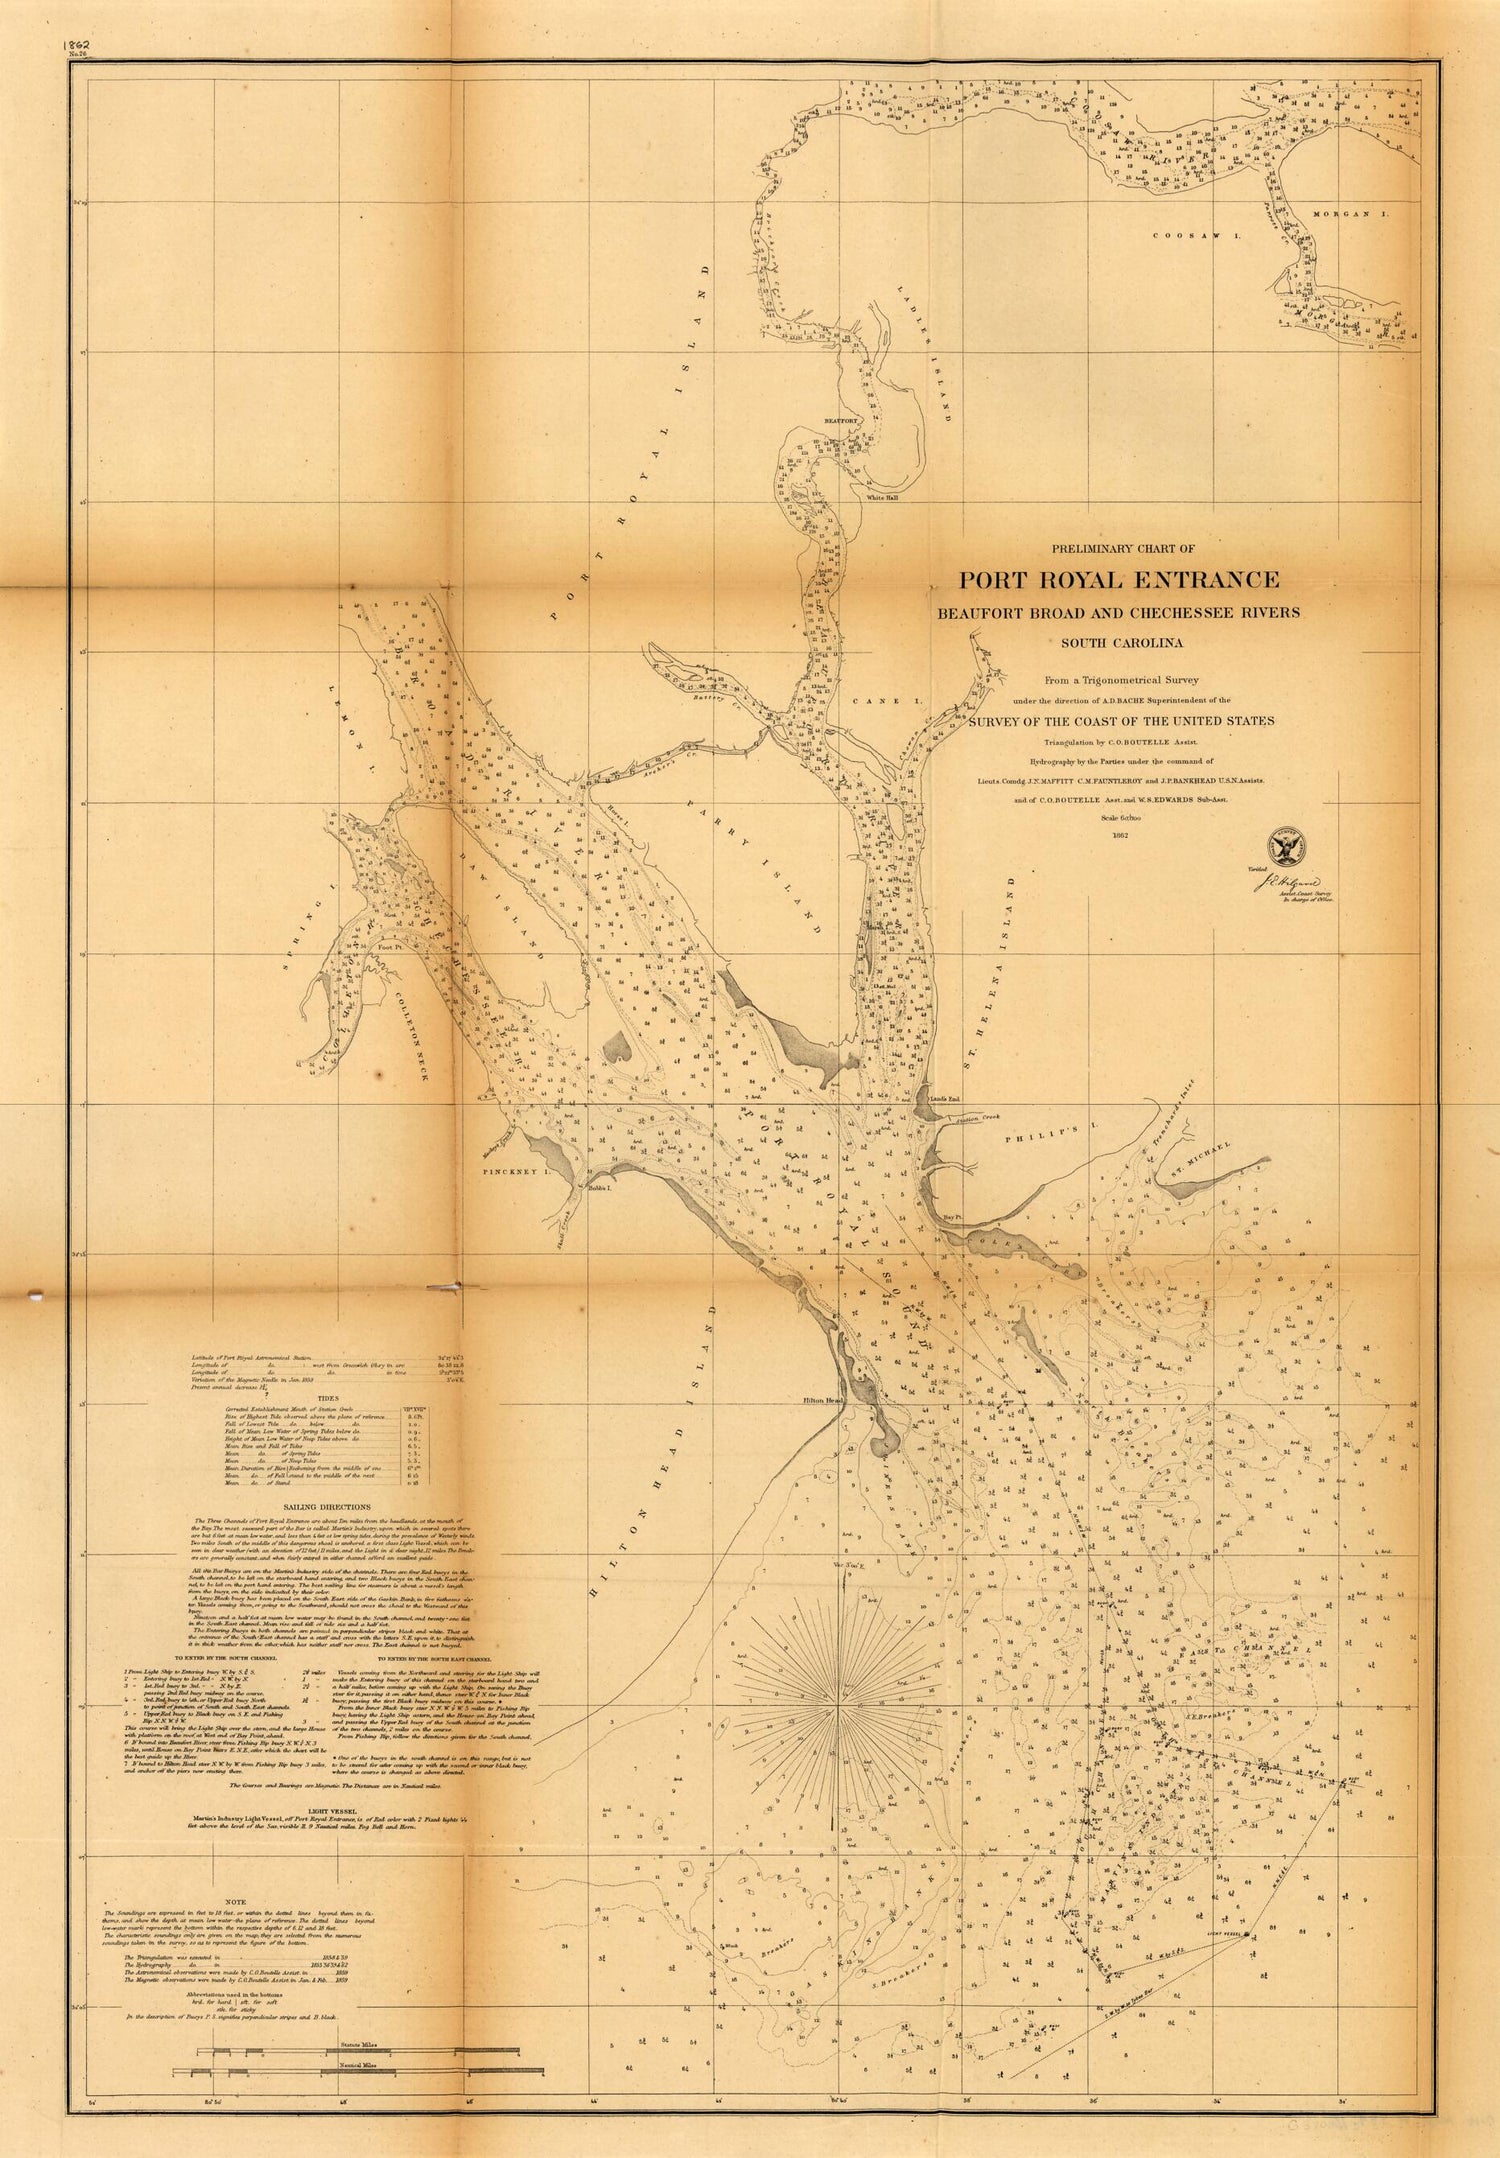 This old map of Preliminary Chart of Port Royal Entrance, Beaufort, Broad and Chechessee Rivers, South Carolina from 1862 was created by  United States Coast Survey in 1862